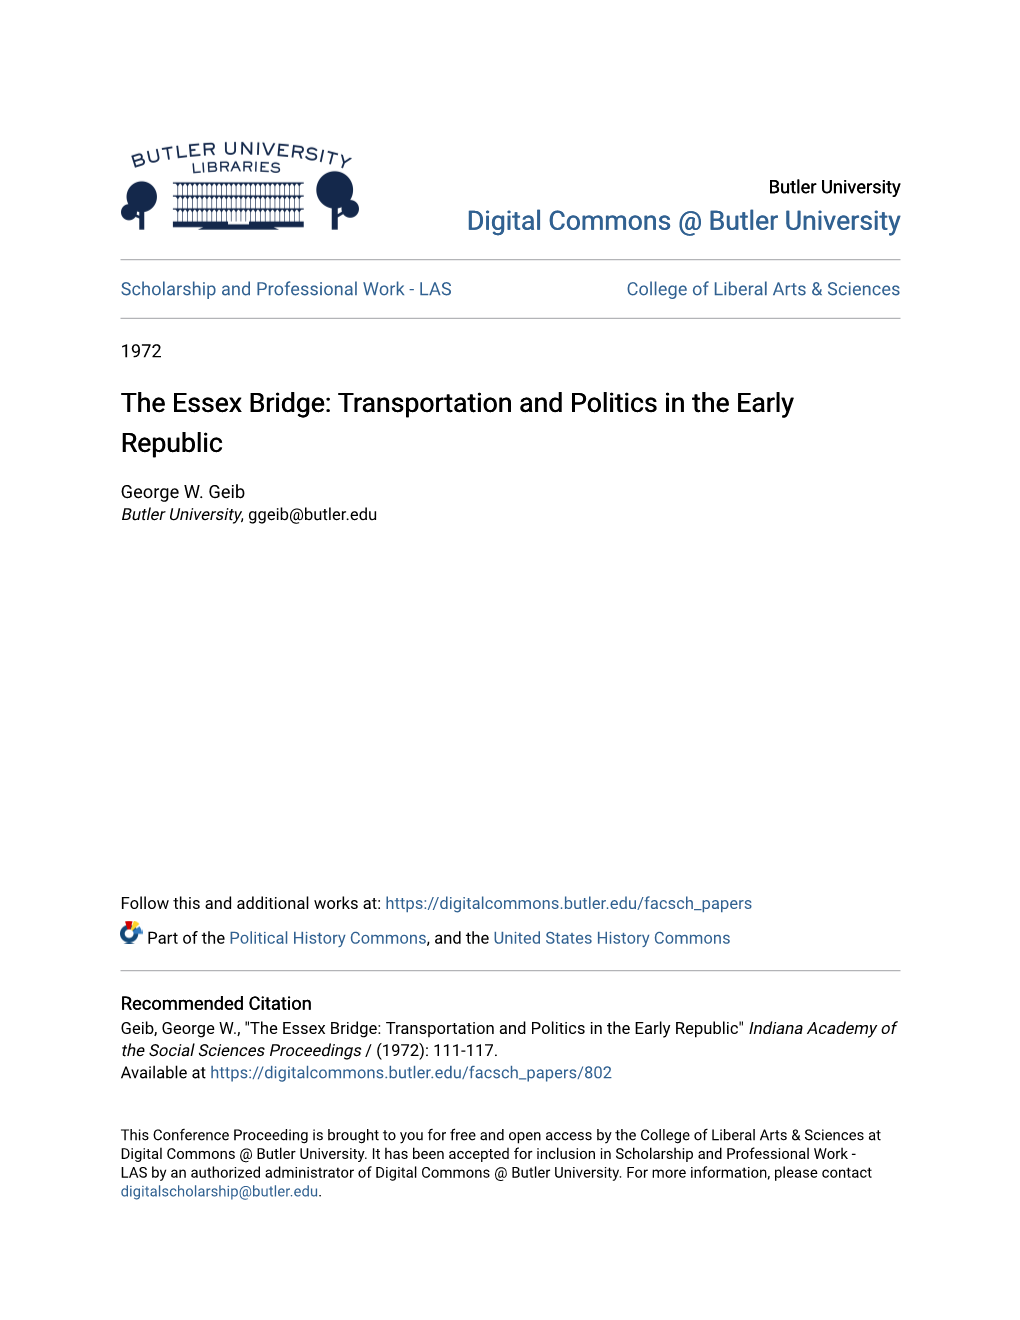 The Essex Bridge: Transportation and Politics in the Early Republic